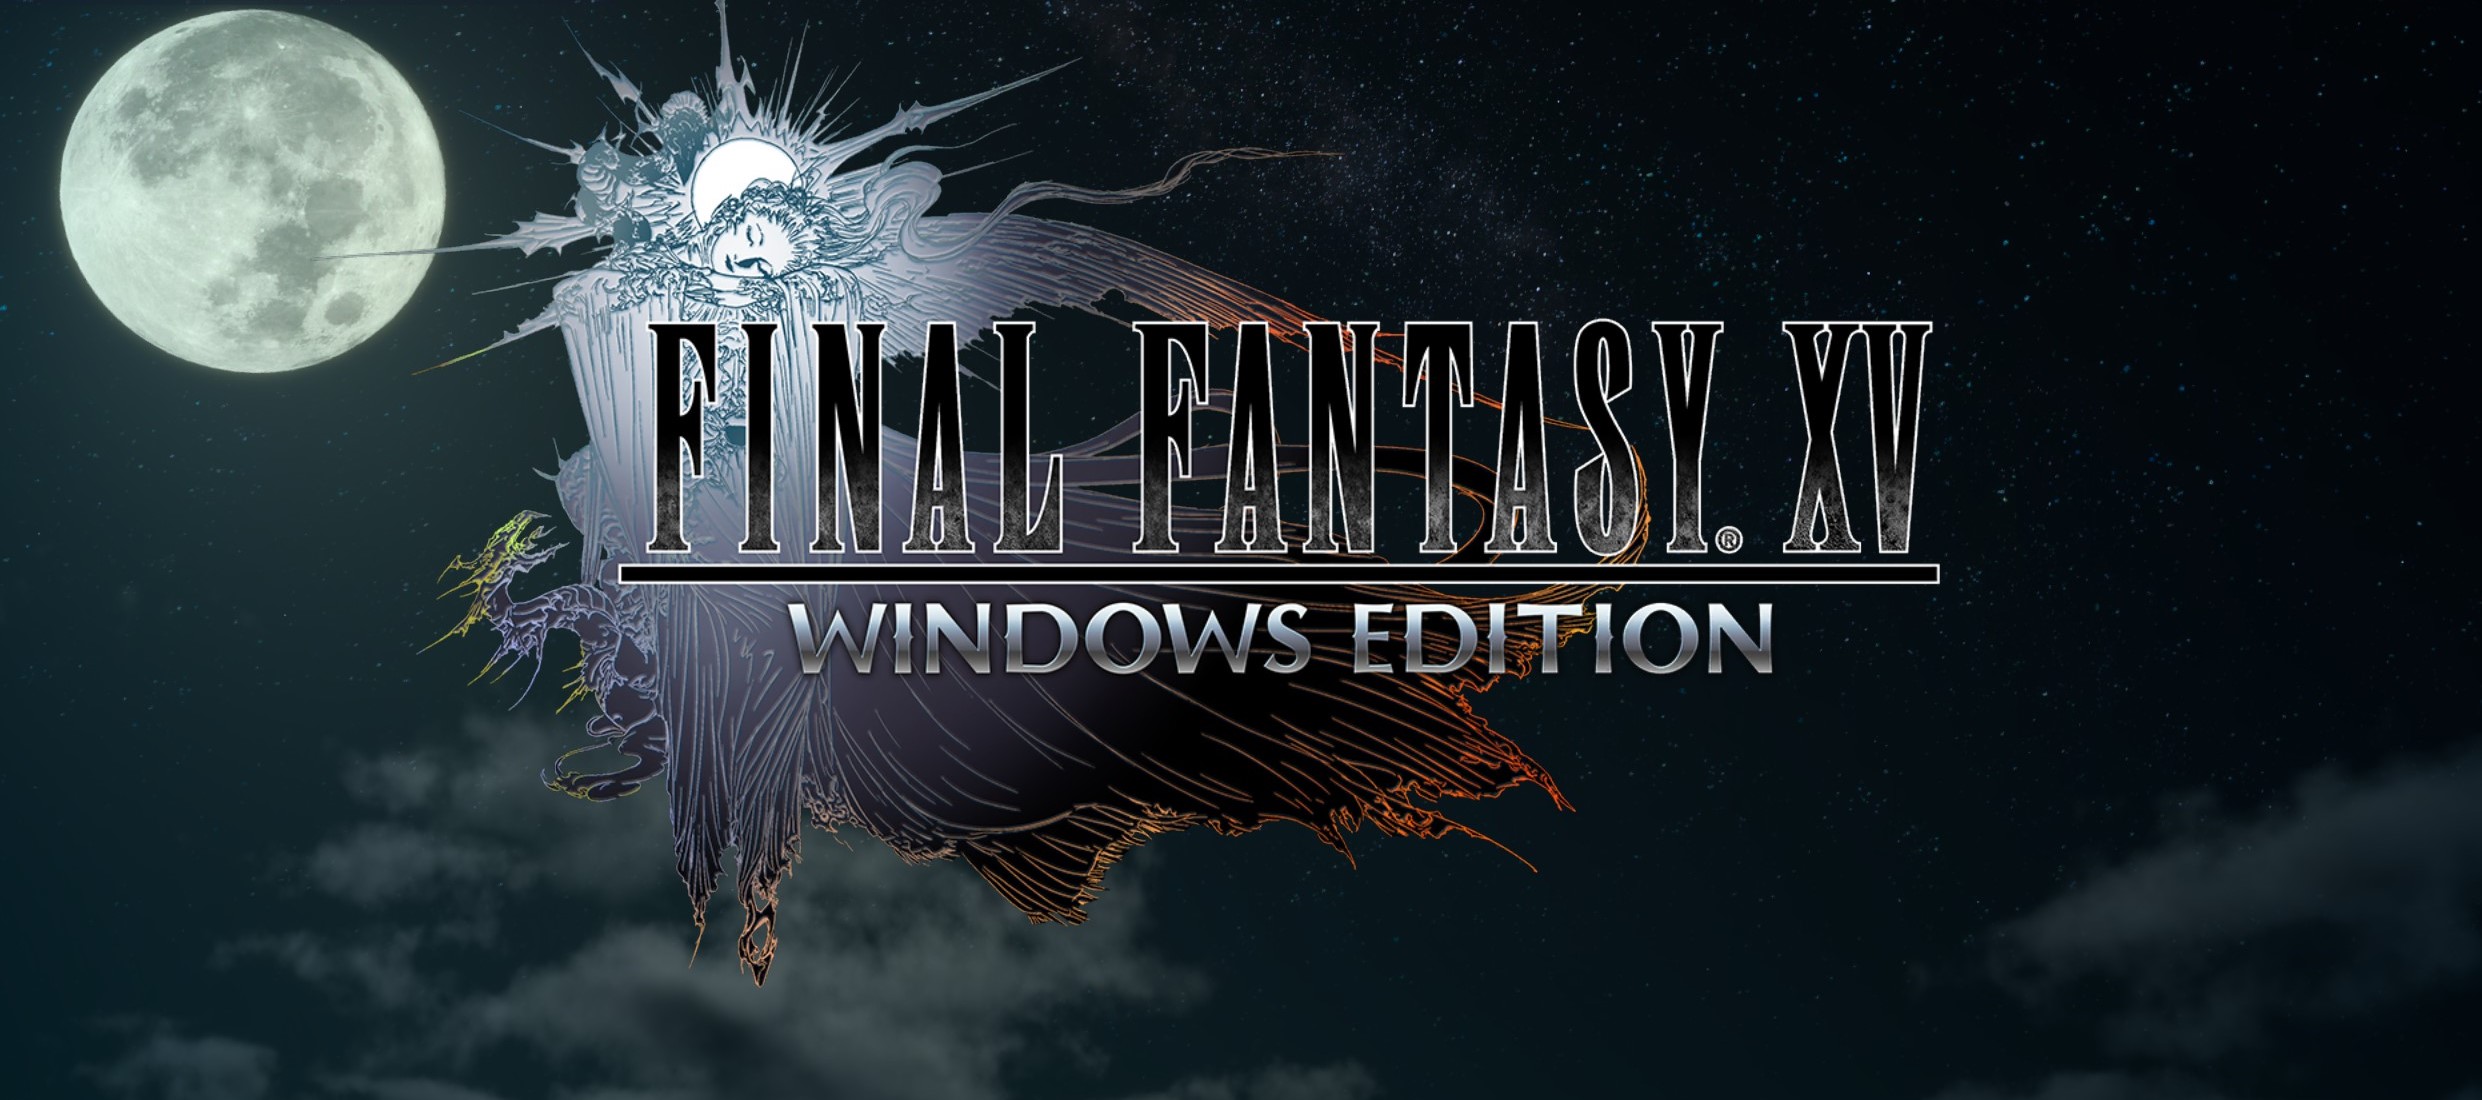 FINAL FANTASY XV WINDOWS EDITION Playable Demo download the last version for ios